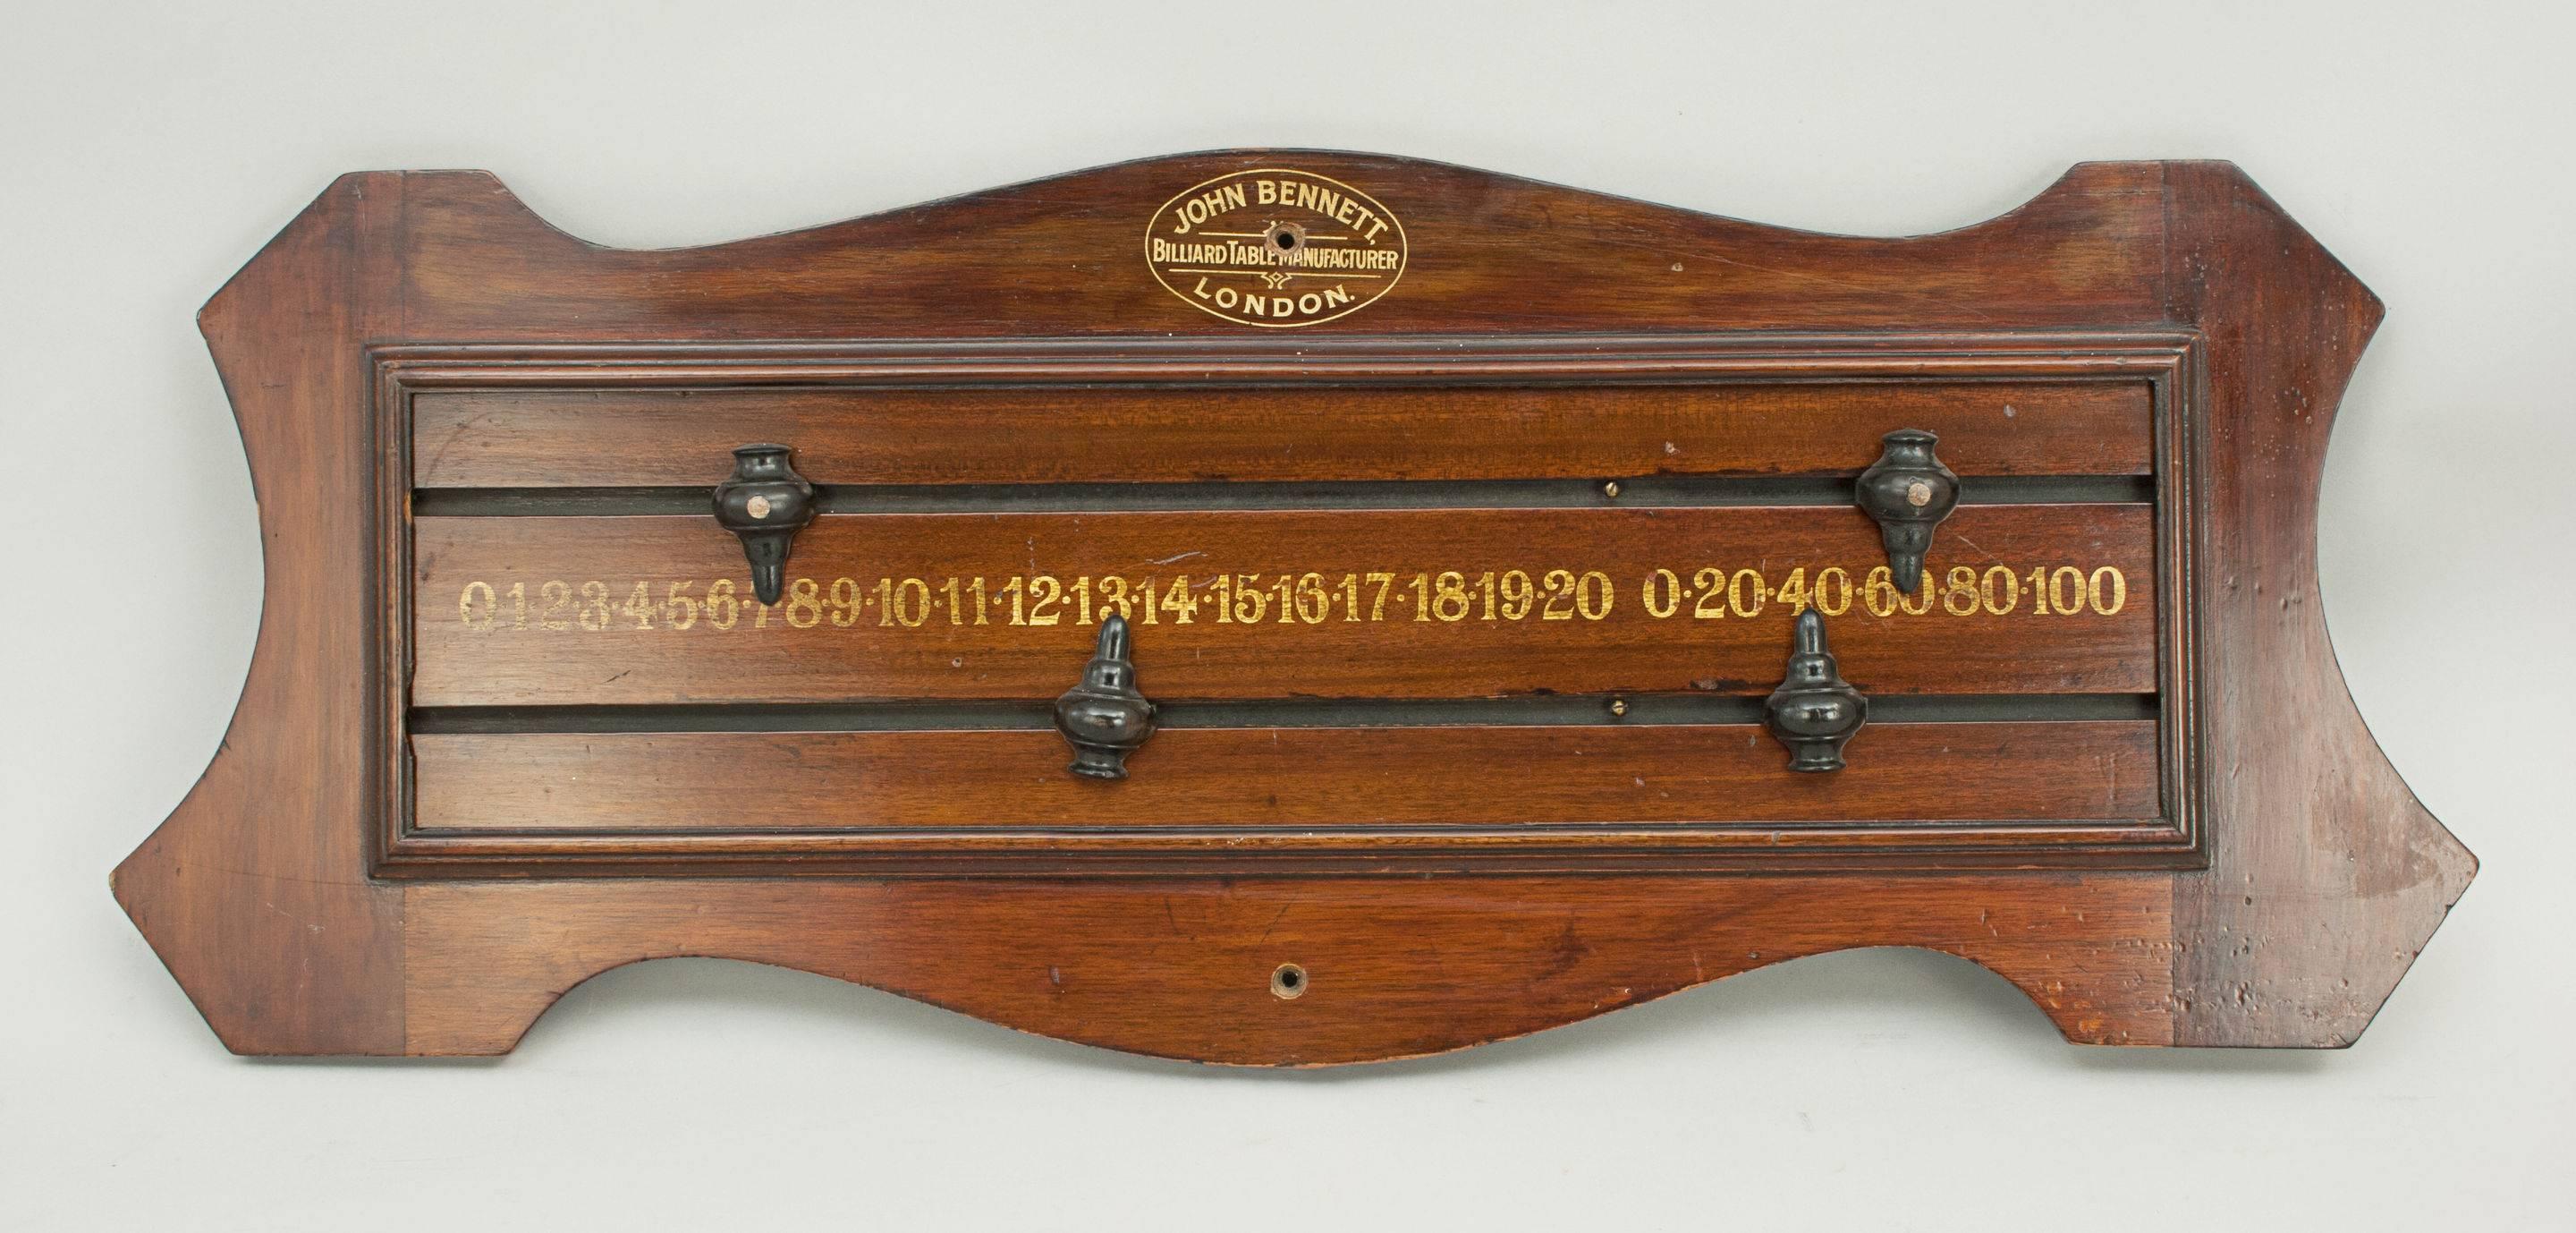 Mahogany score board.
A nice shaped billiard, snooker scoreboard by John Bennett, London. The scorer with wooden pointers, one set with spot. The numbers are 0 to 20 and 0 to 100 in multiples of 20.